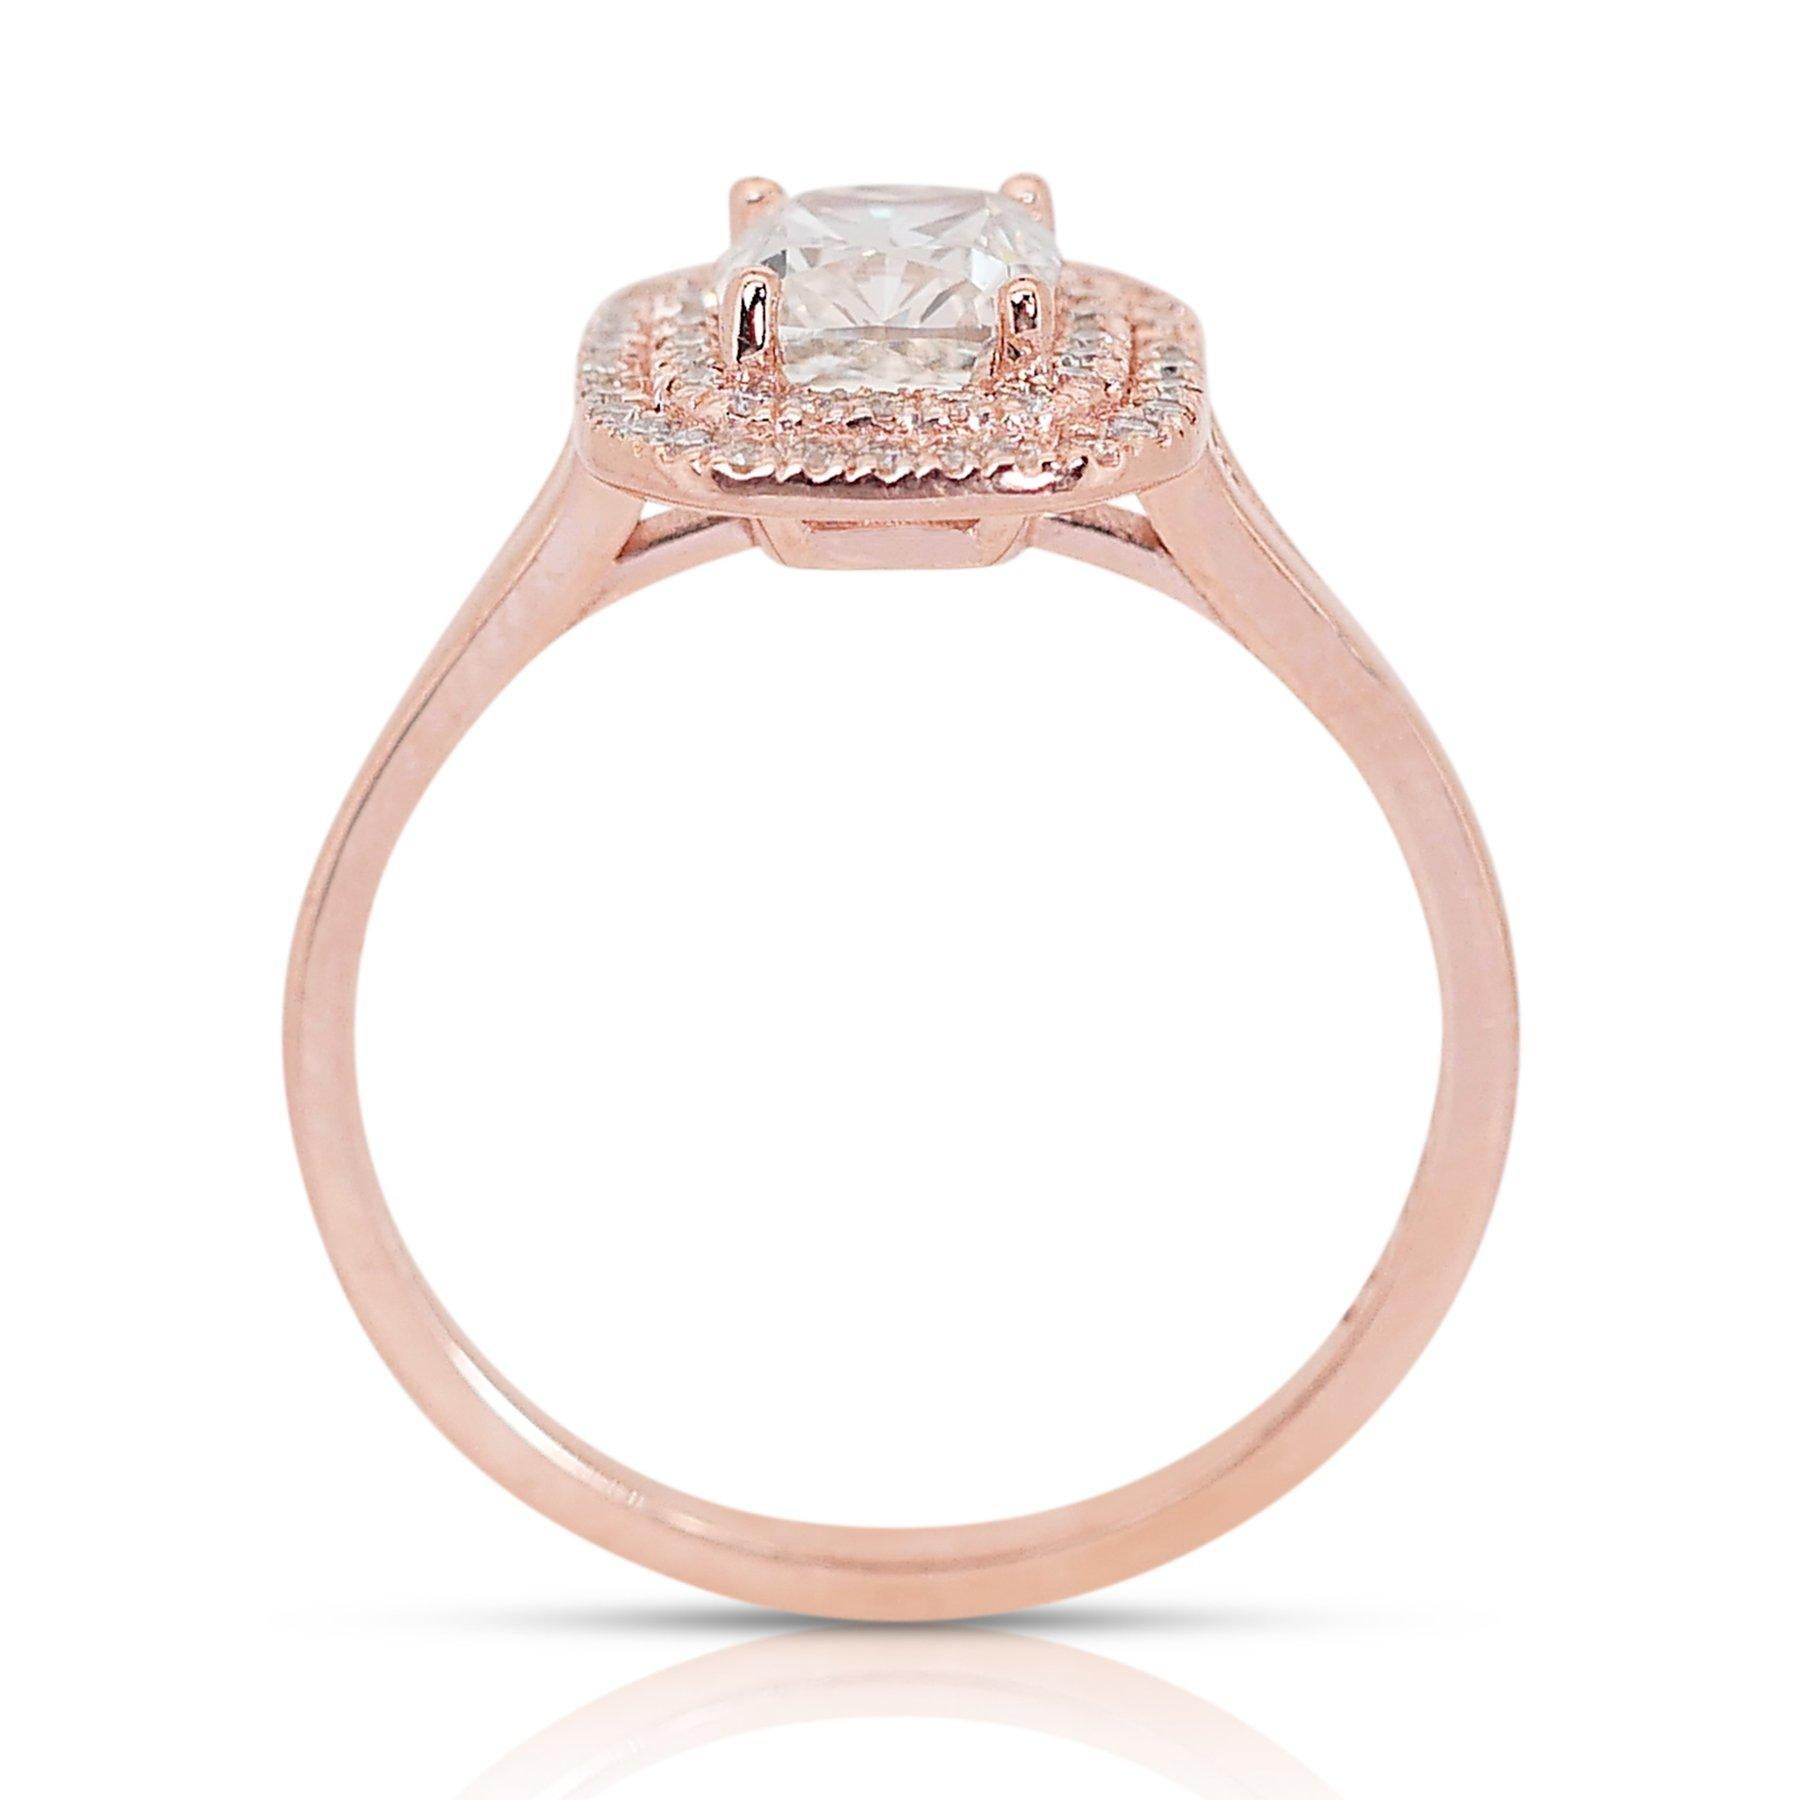 Elegant 1.41ct Diamonds Double Halo Ring in 18k Rose Gold - GIA Certified For Sale 3